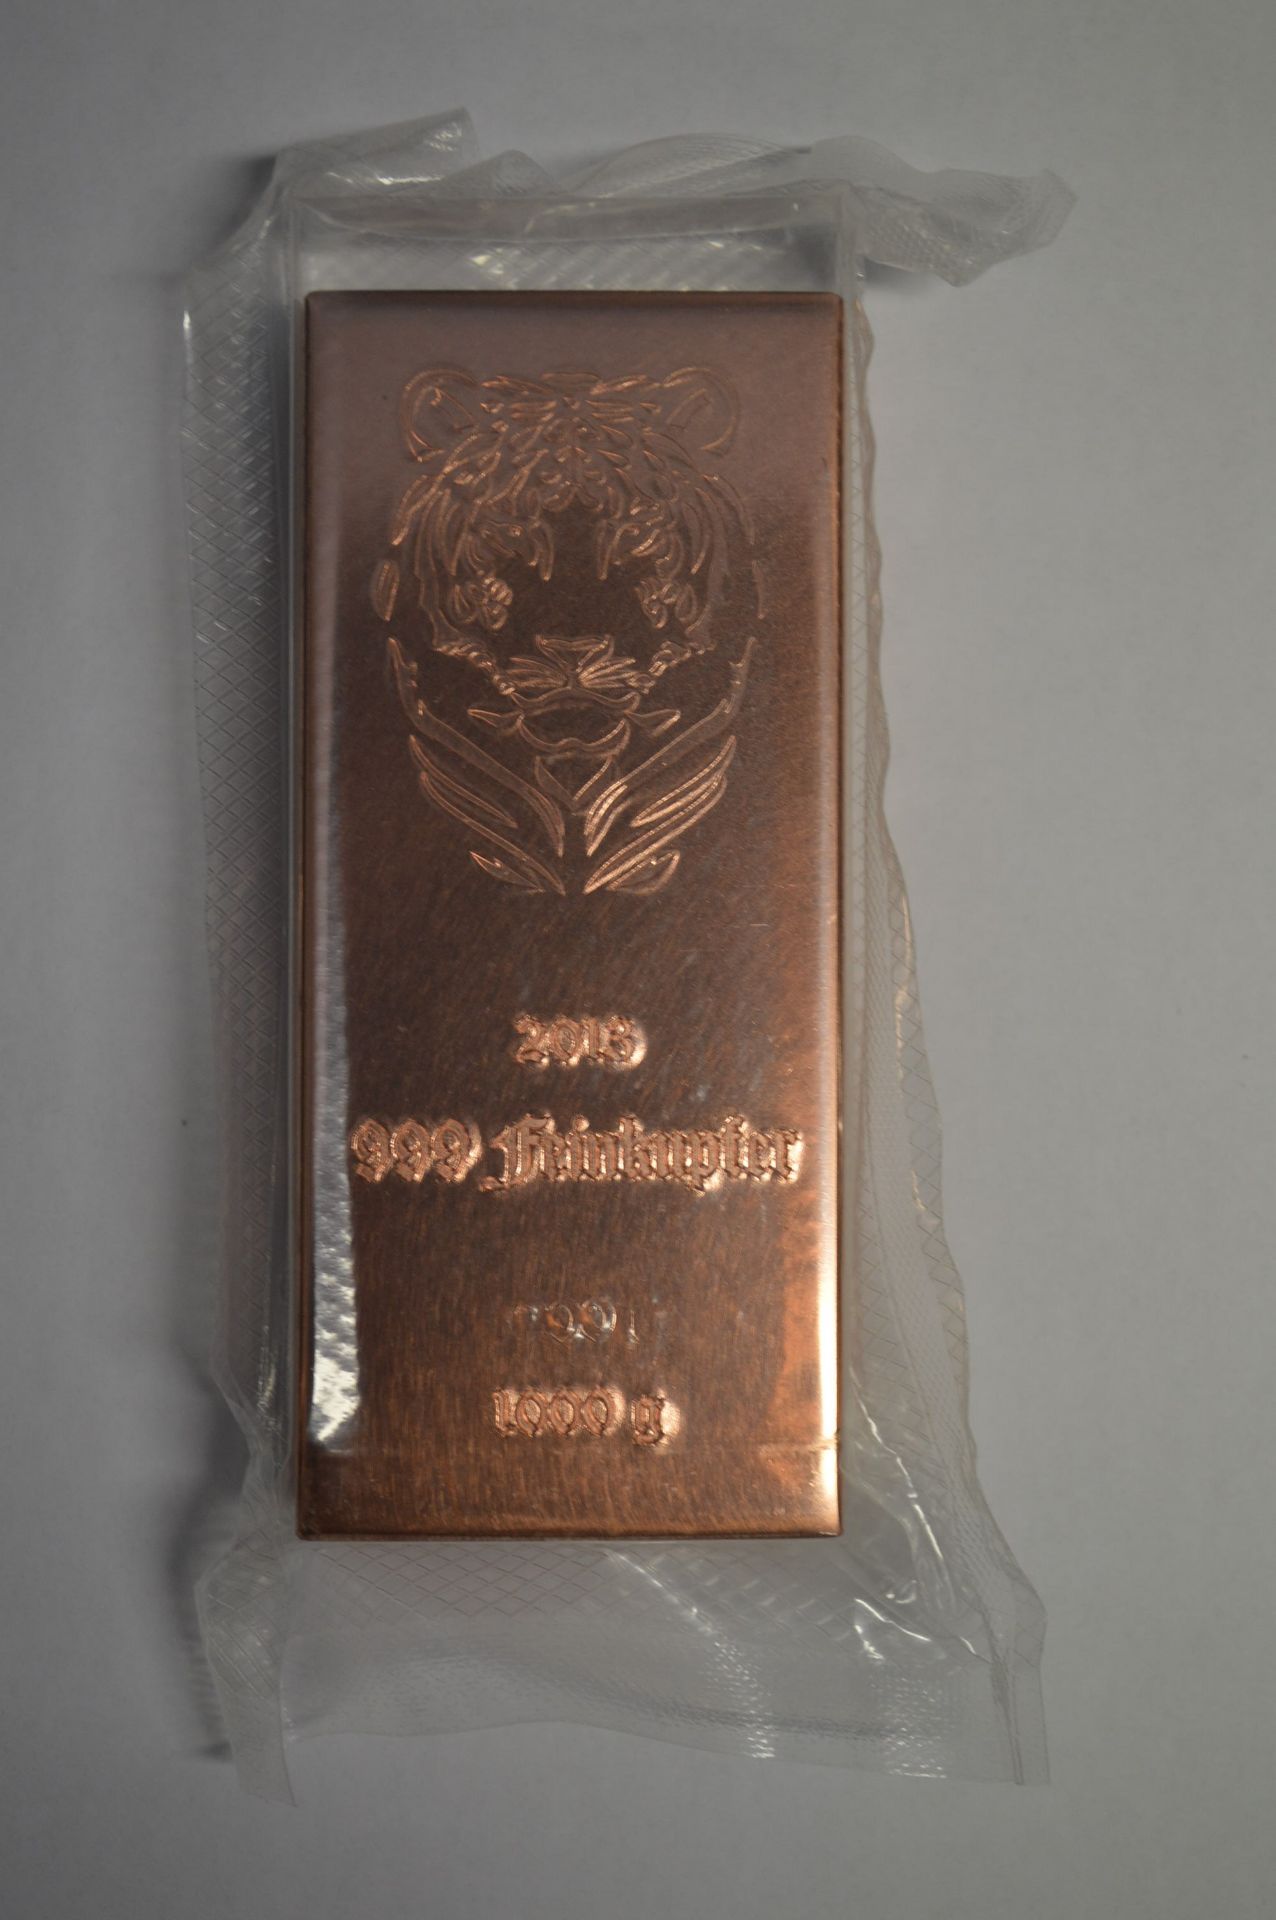 GENUINE .999 = 99.9% PURE COPPER BULLION 1KG  - TIGER FACE! THIS AUCTION IS FOR ONE BAR 1KG PURE